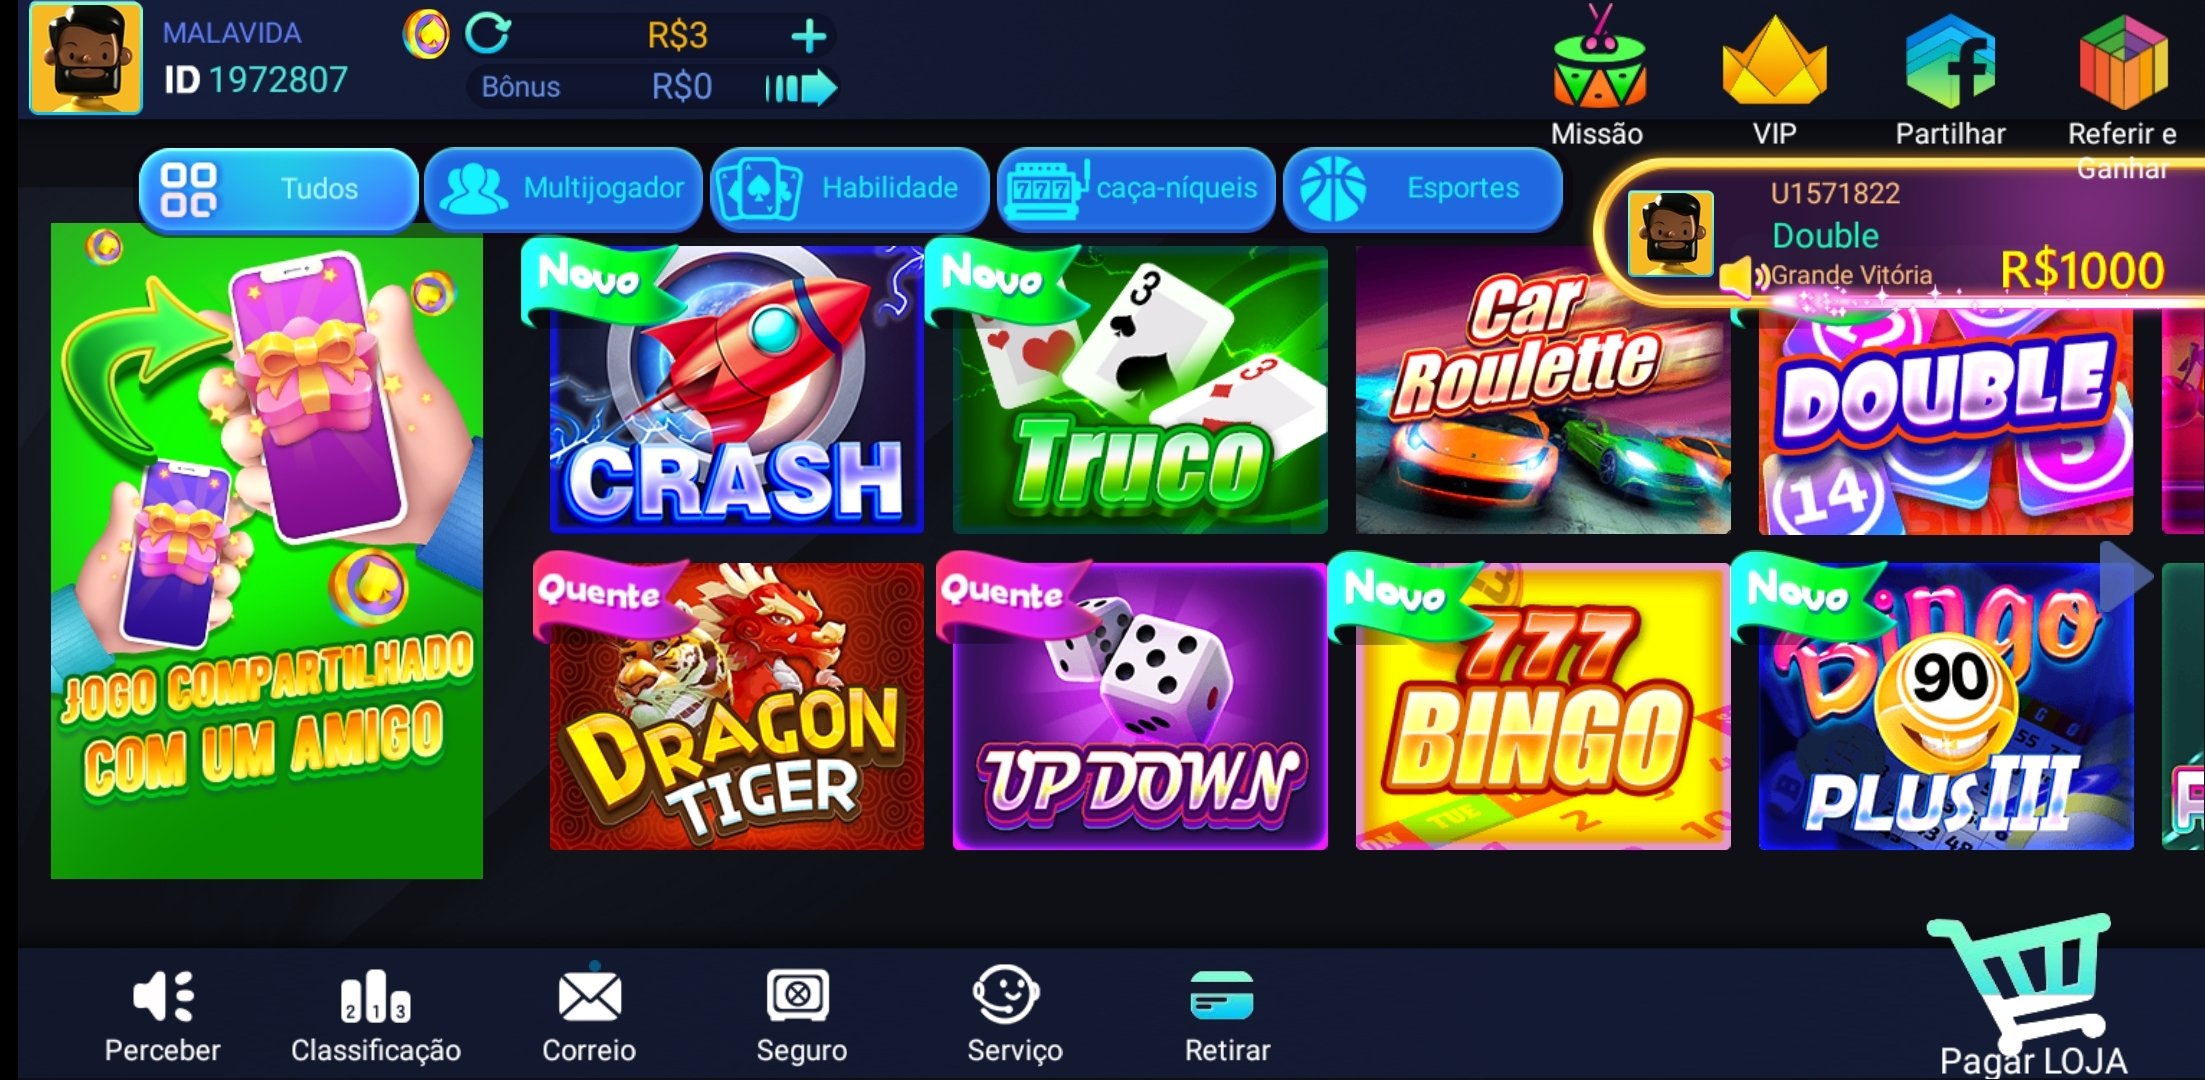 Truco Online APK for Android - Download